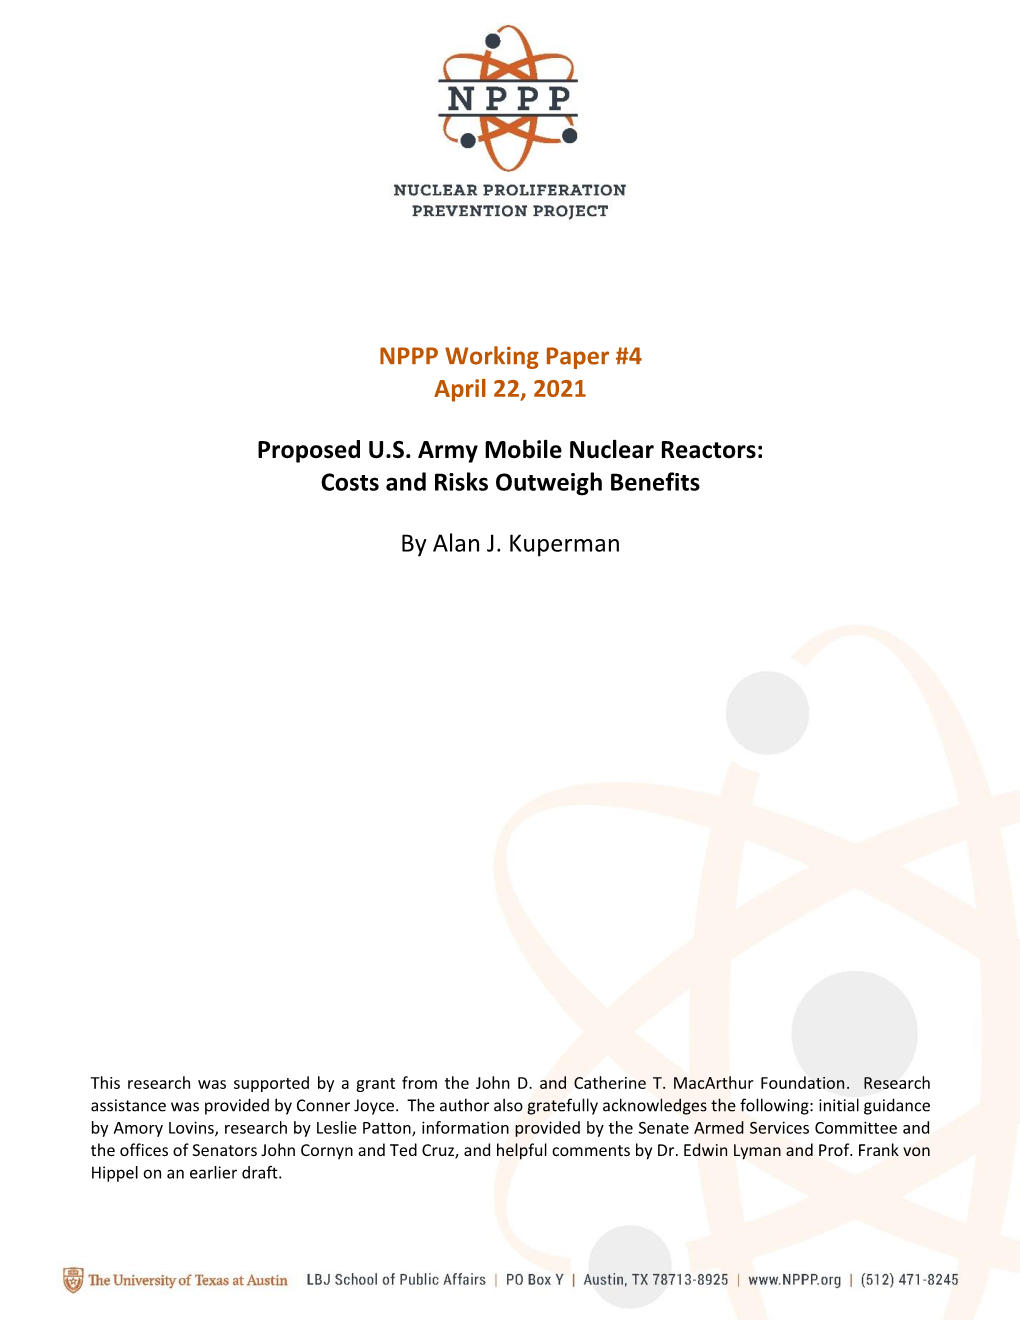 NPPP Working Paper #4 April 22, 2021 Proposed U.S. Army Mobile Nuclear Reactors: Costs and Risks Outweigh Benefits by Alan J. Ku